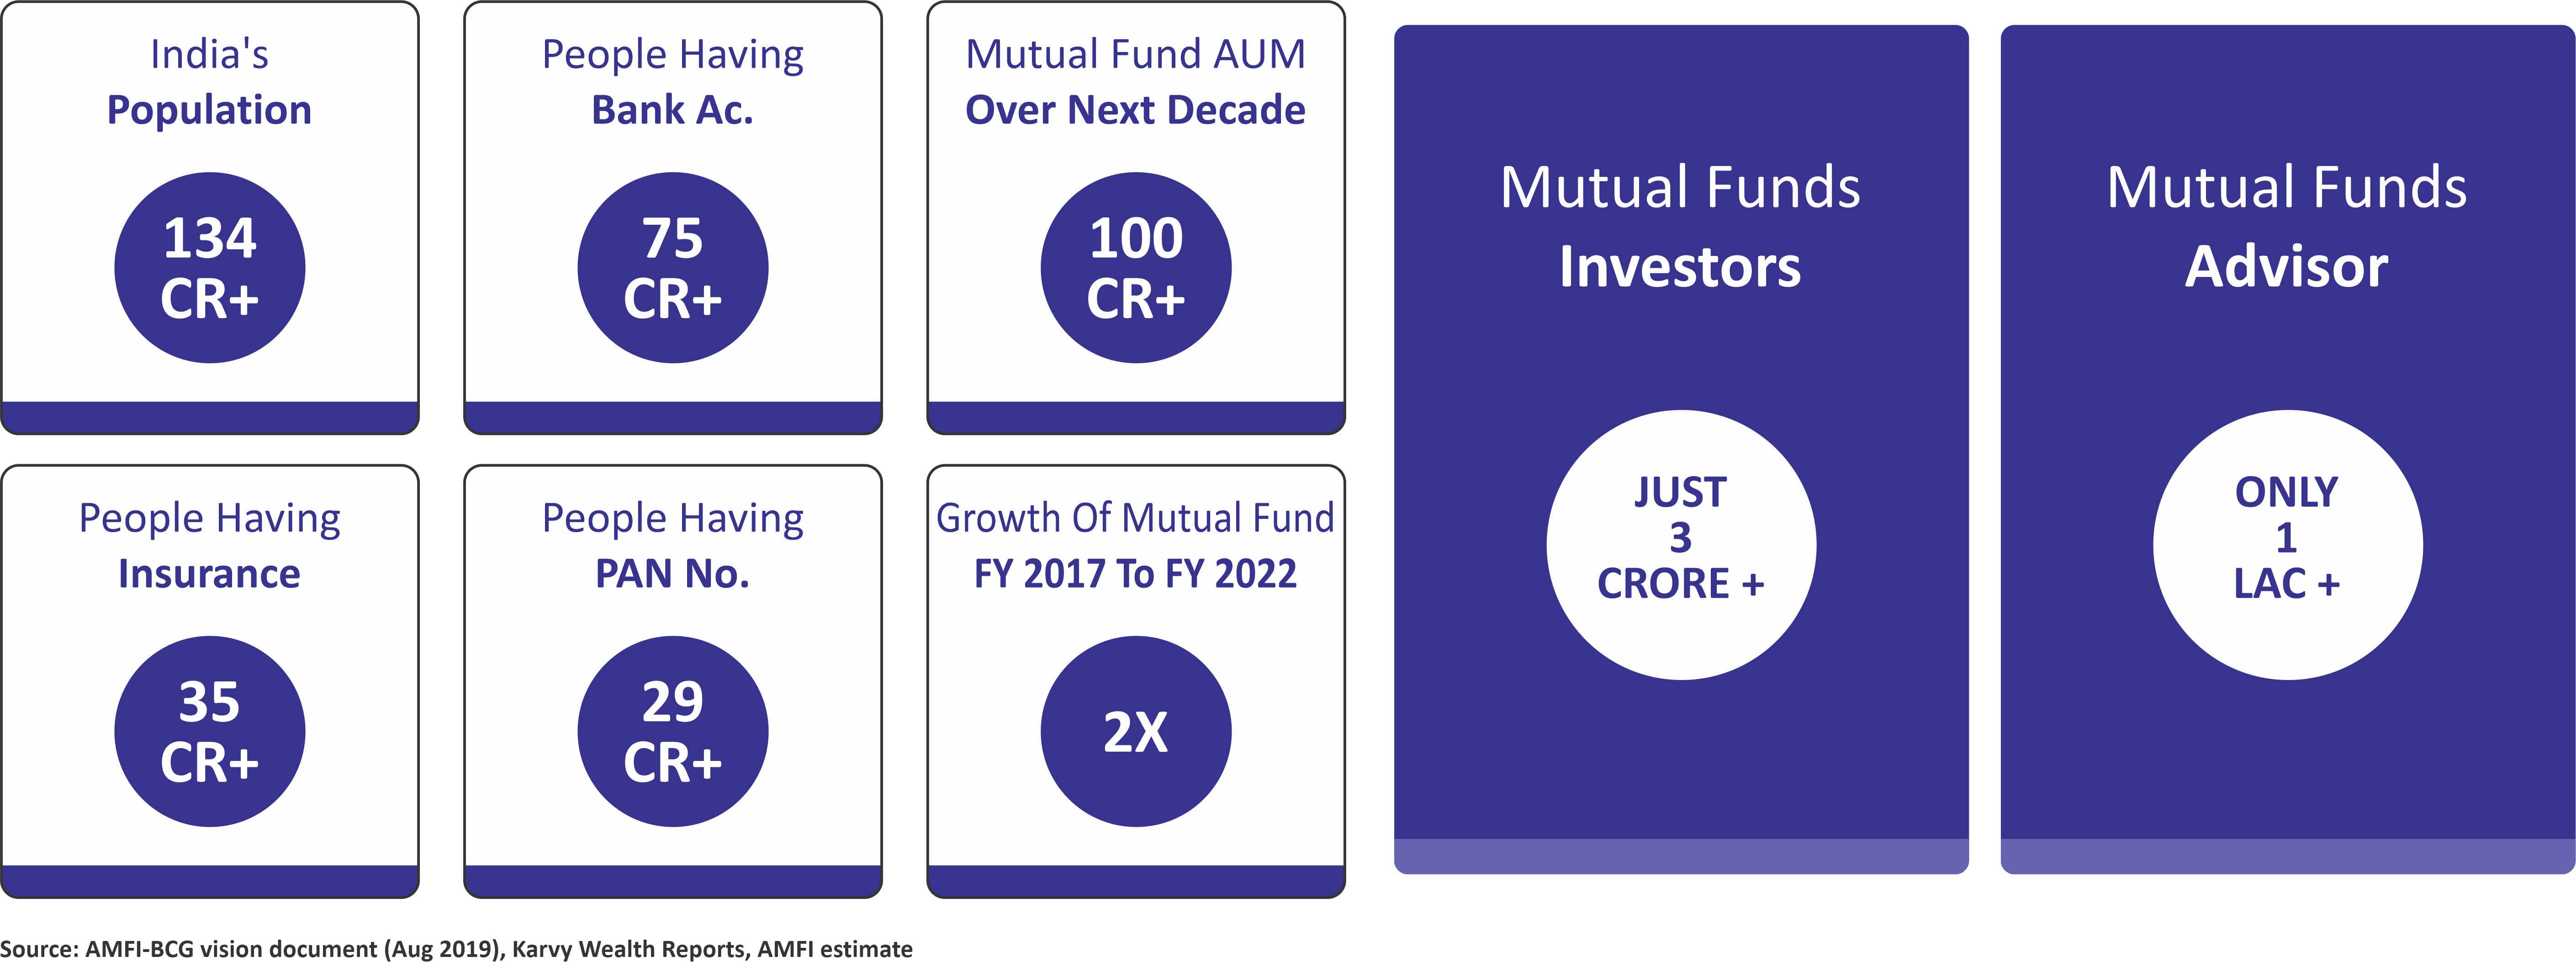 Opportunities for Mutual Fund Advisor